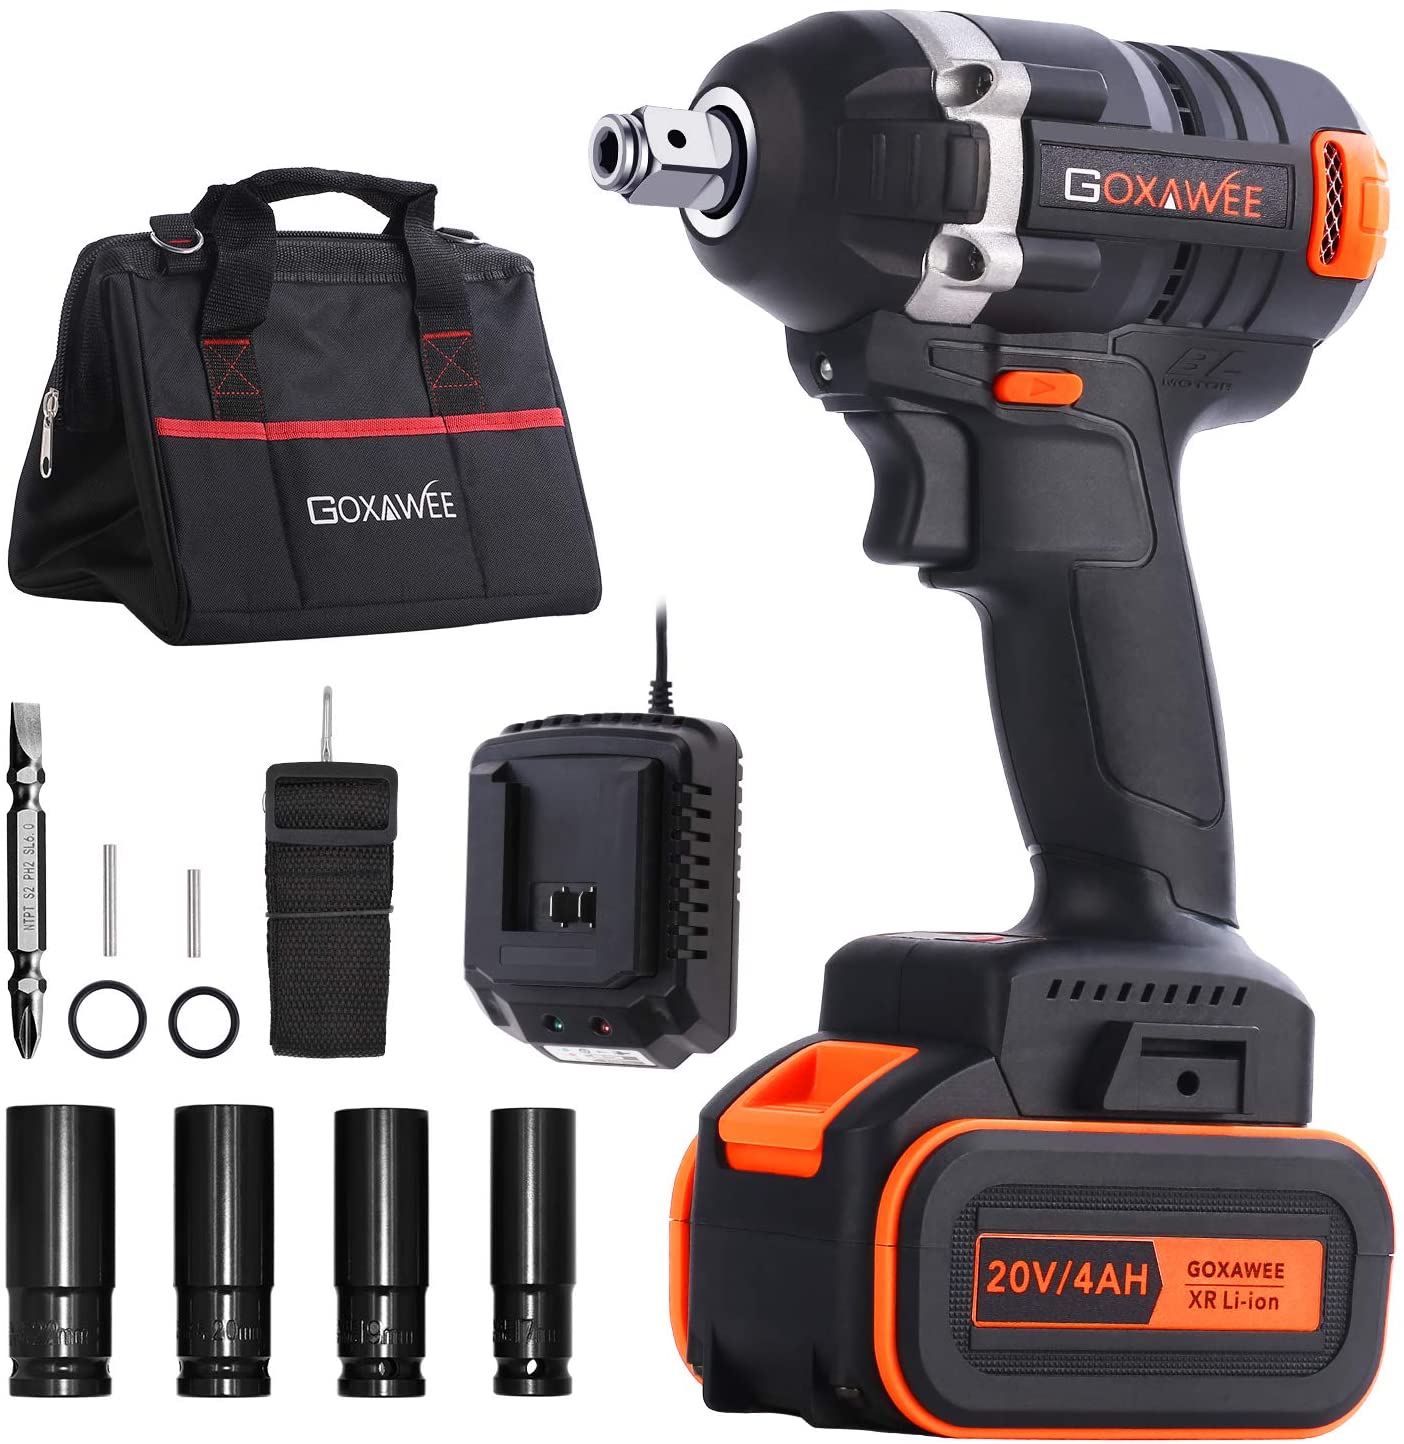 Impact Wrench, GOXAWEE 20V Cordless Impact Driver Set (4.0Ah Lithium Battery, 300Nm/ Brushless/ 2-Speed,12.7mm & 6.35mm Chuck) with 11 Accessories Include Tool Bag